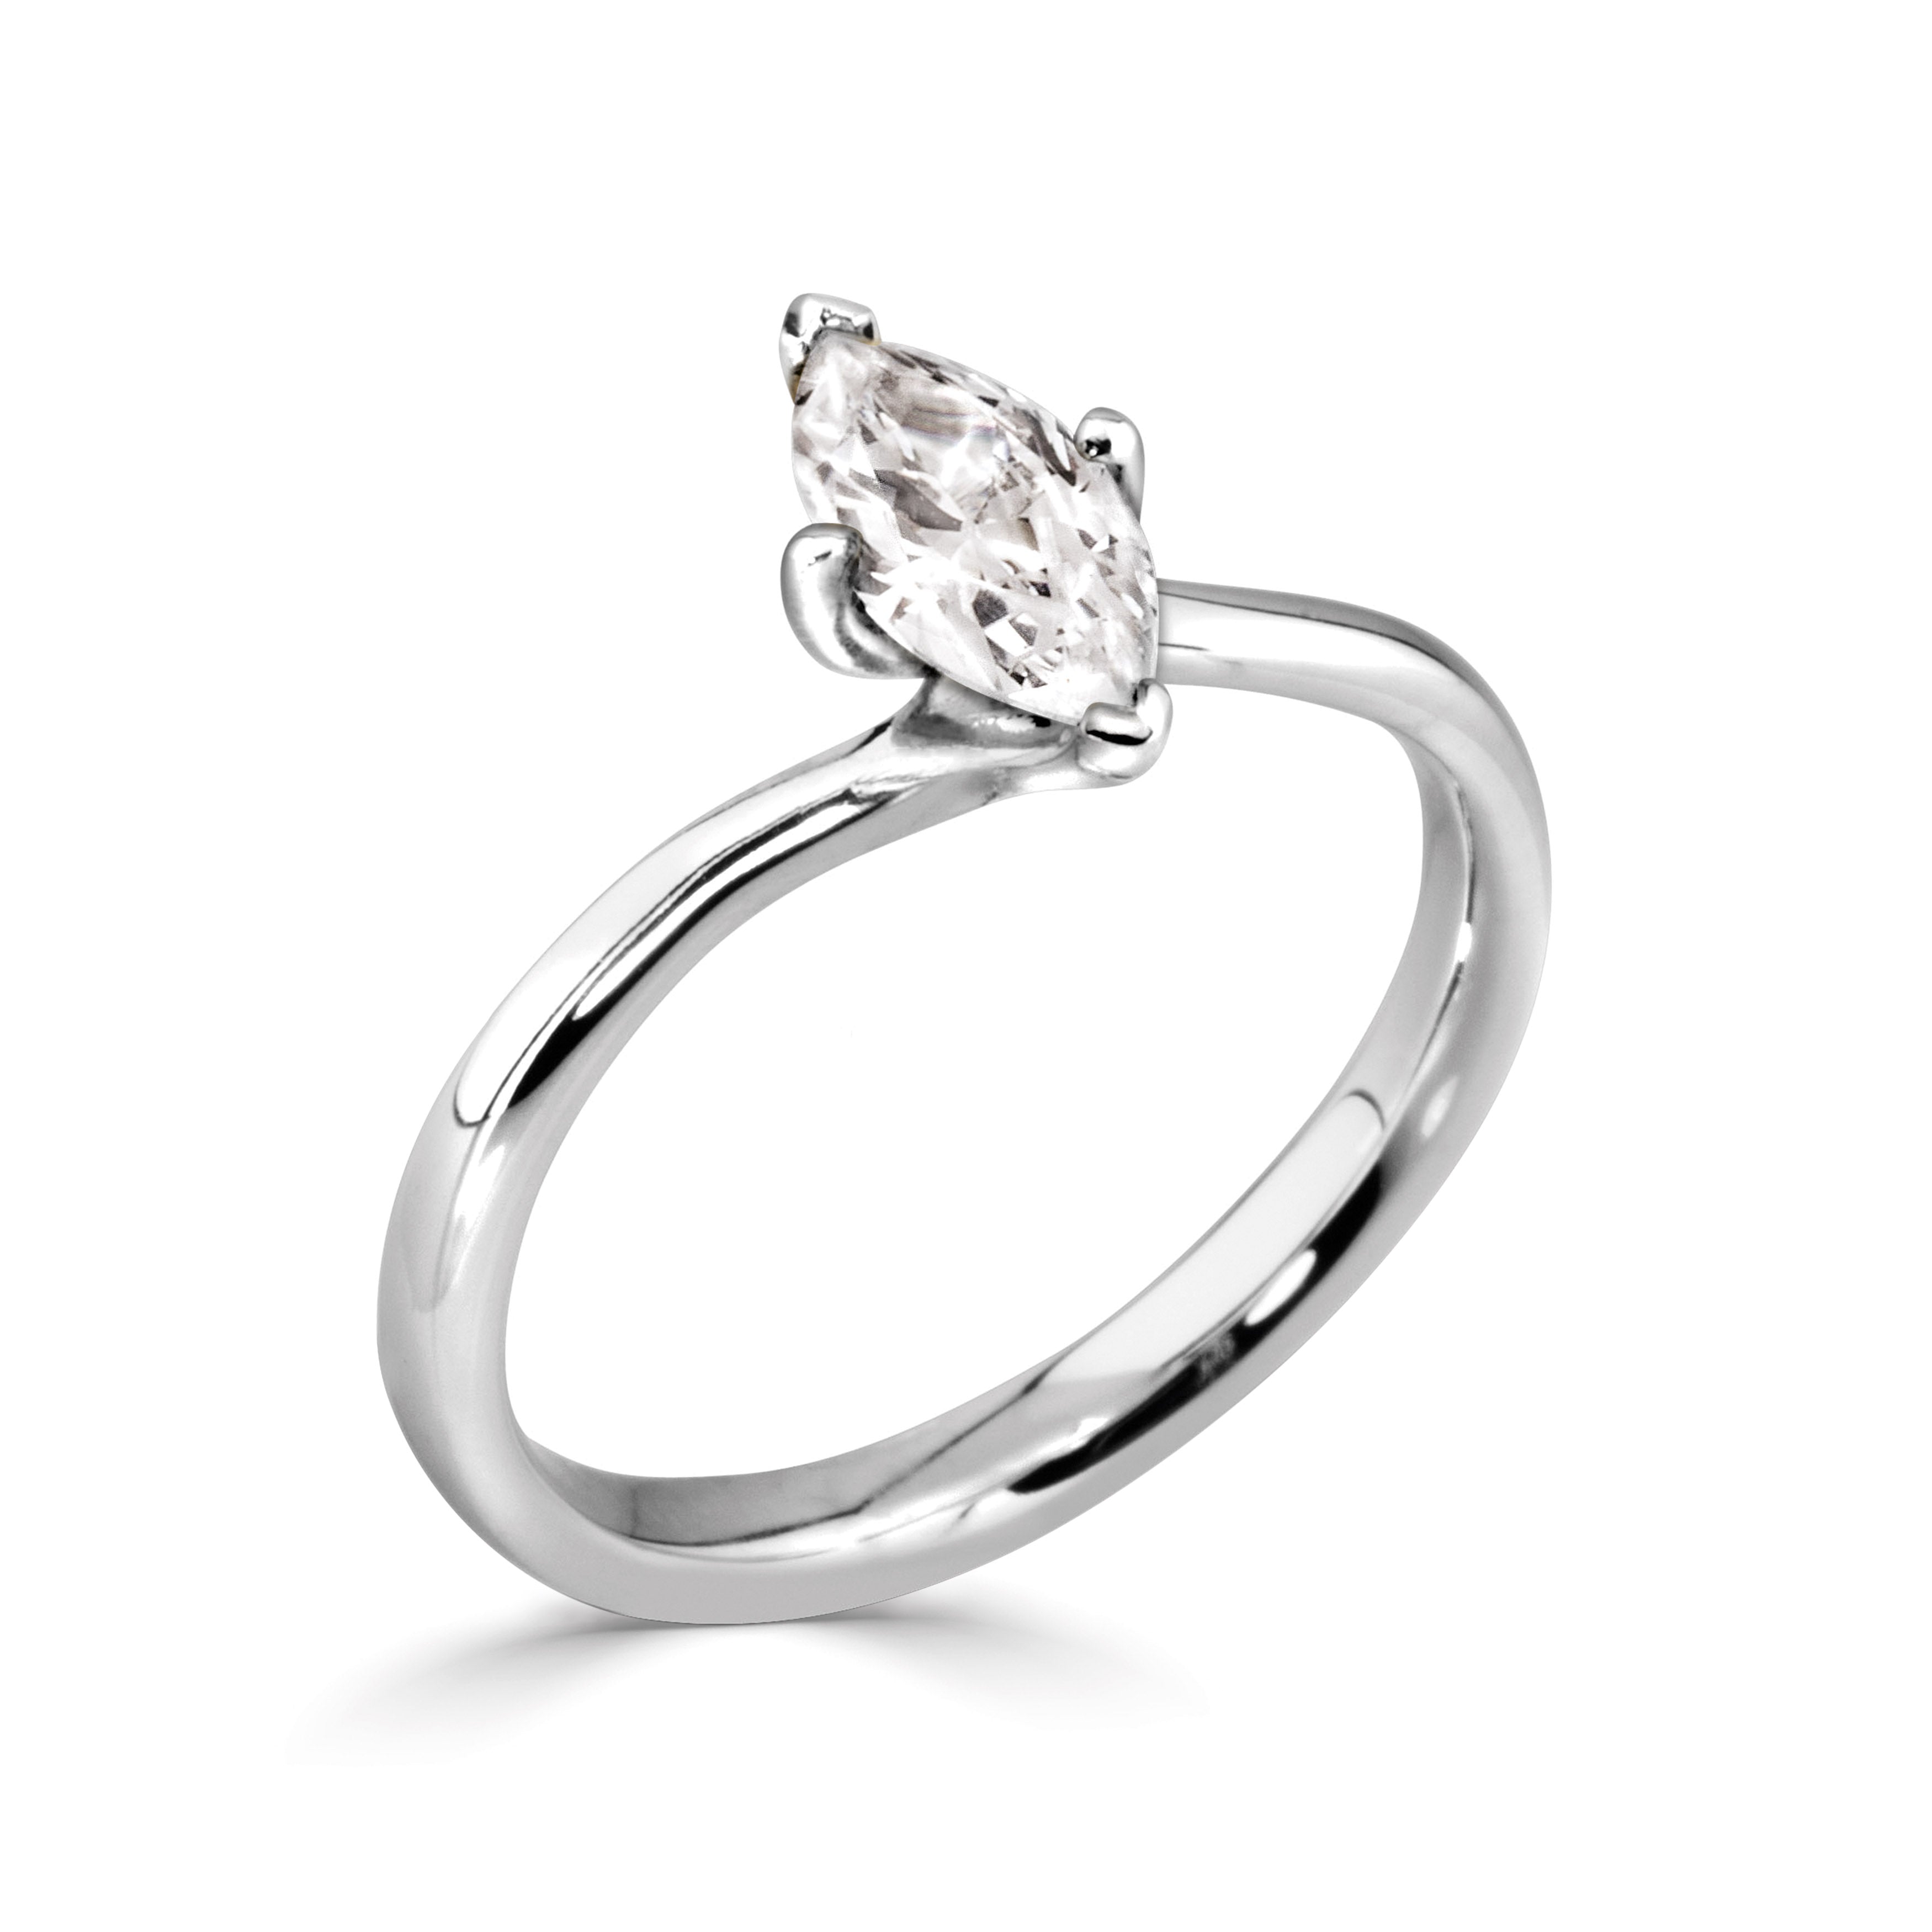 18CT White Gold Marquise Lab Grown Diamond Ring 1ct